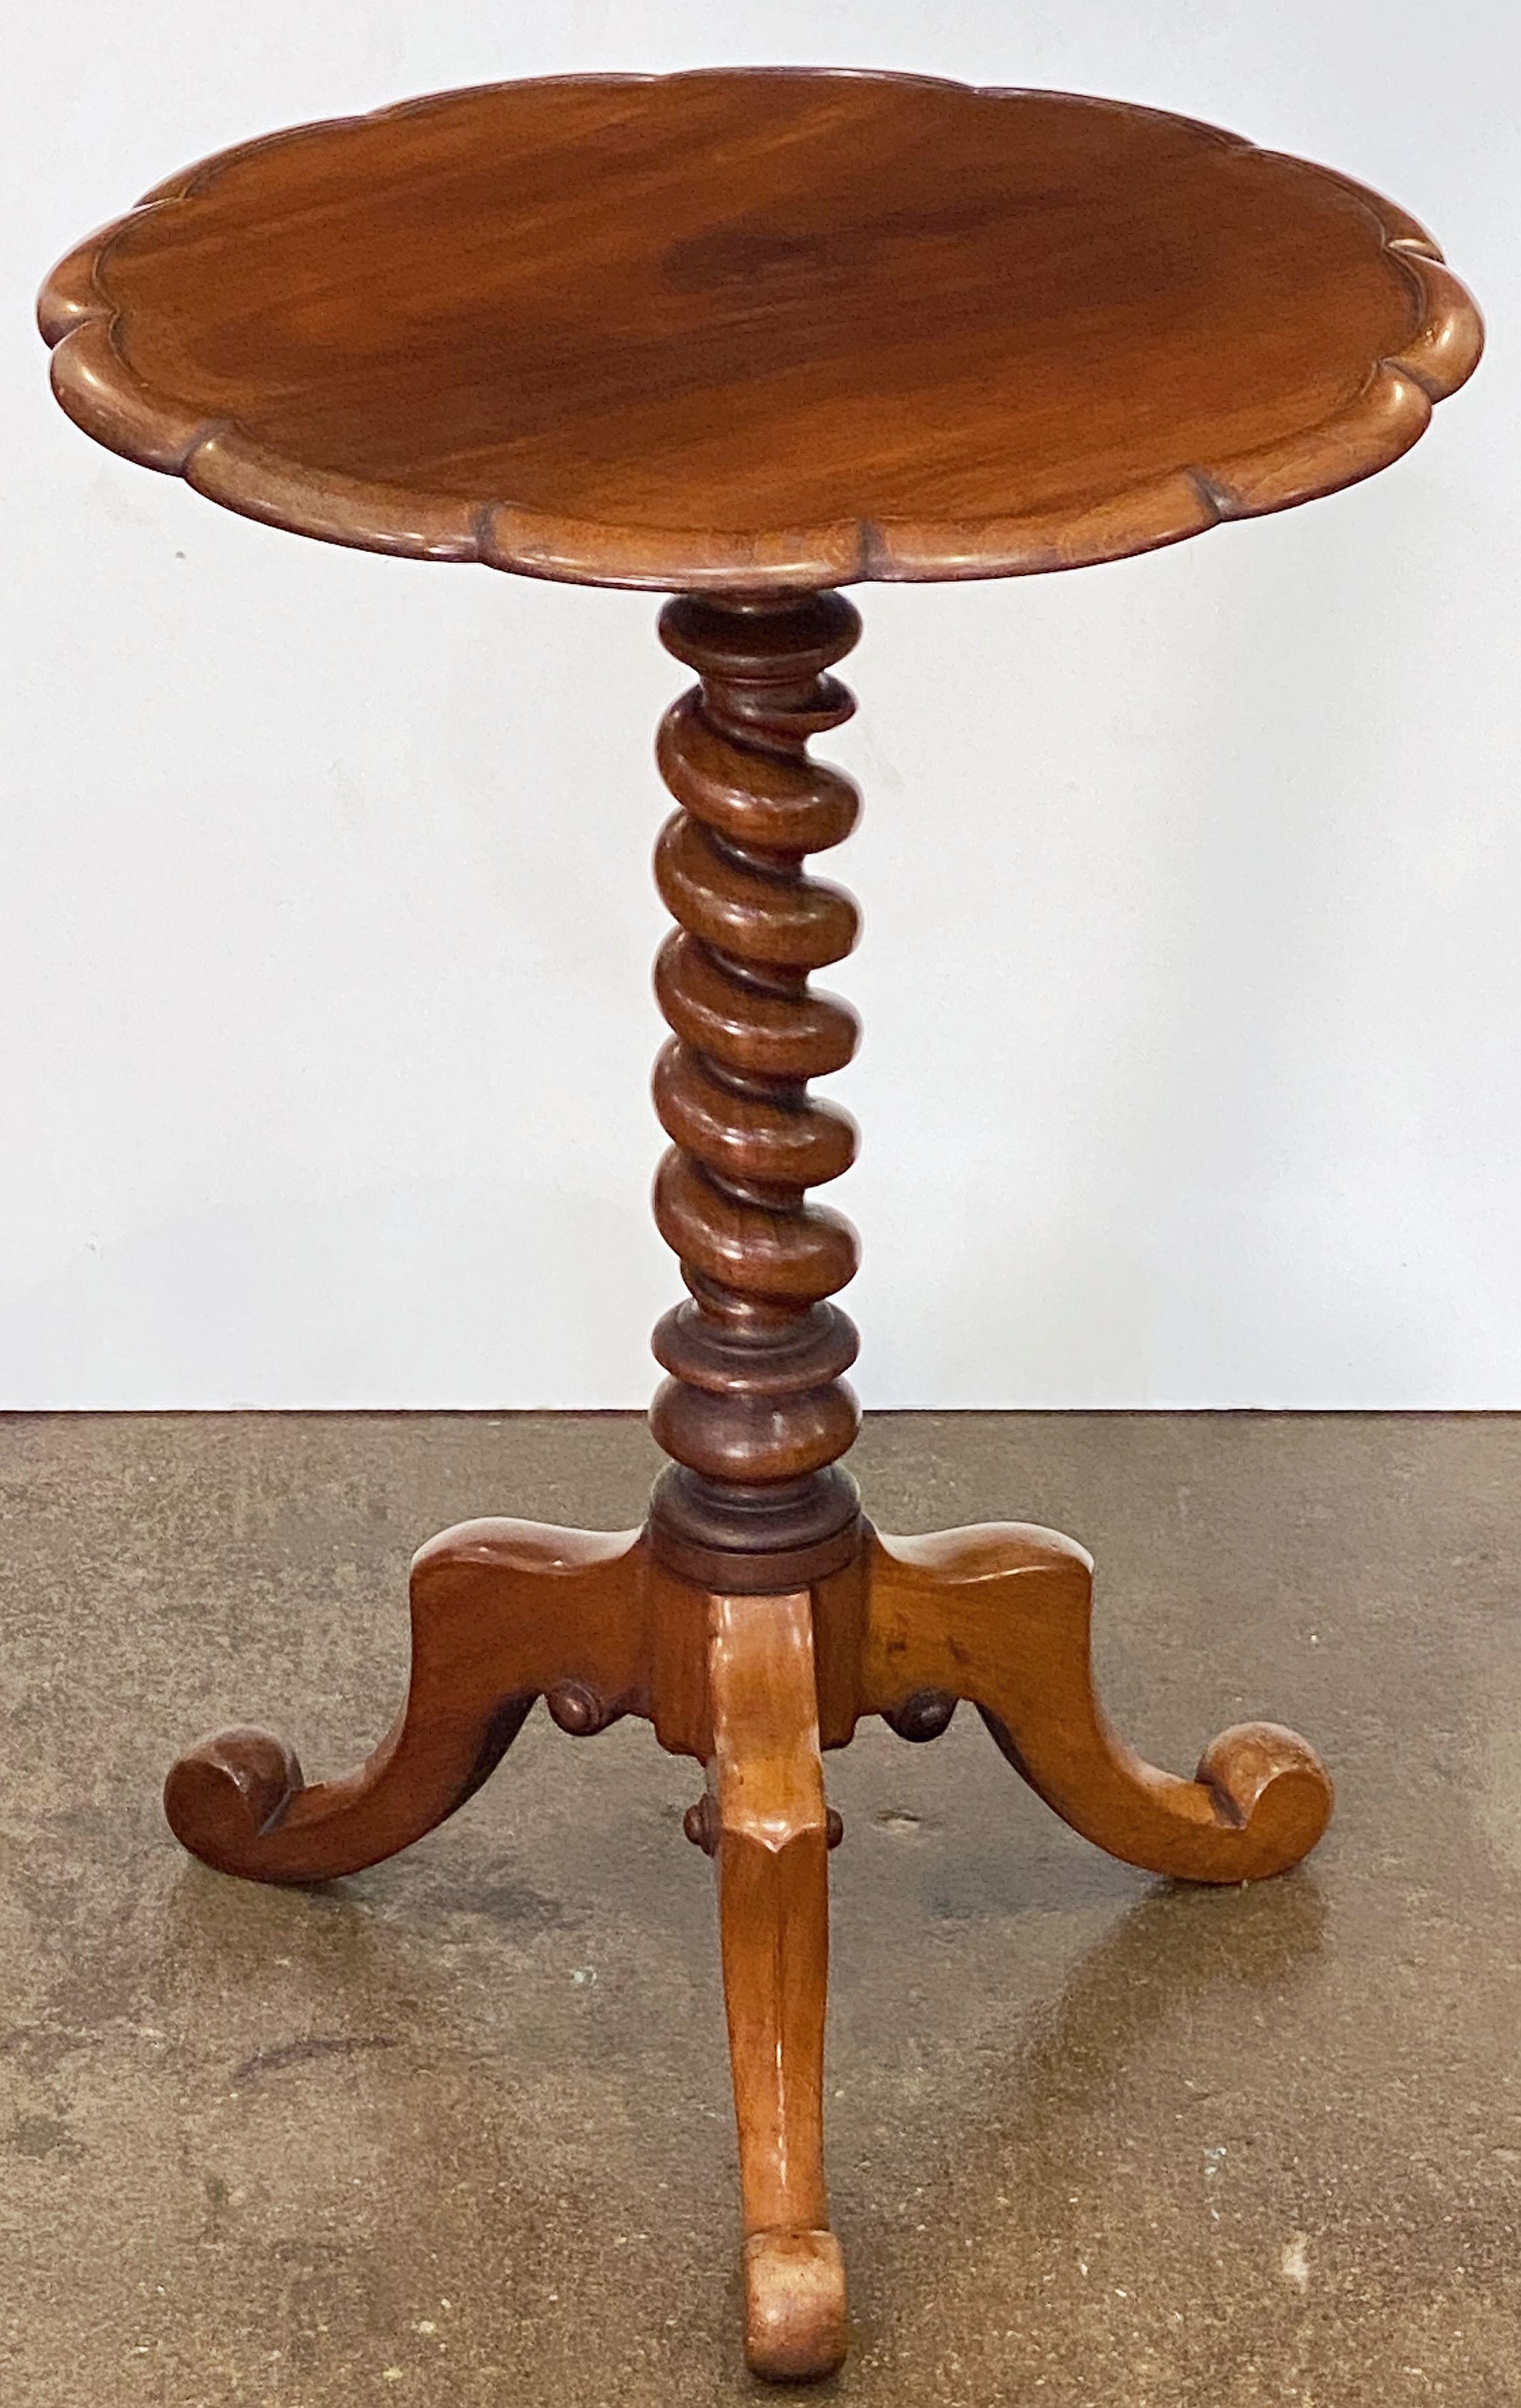 A handsome English occasional wine or drinks table of mahogany, featuring a round or circular scalloped-edge top over a finely-turned barley twist stem or column with tripod legs.

Makes a great occasional or side table for a chair or sofa.